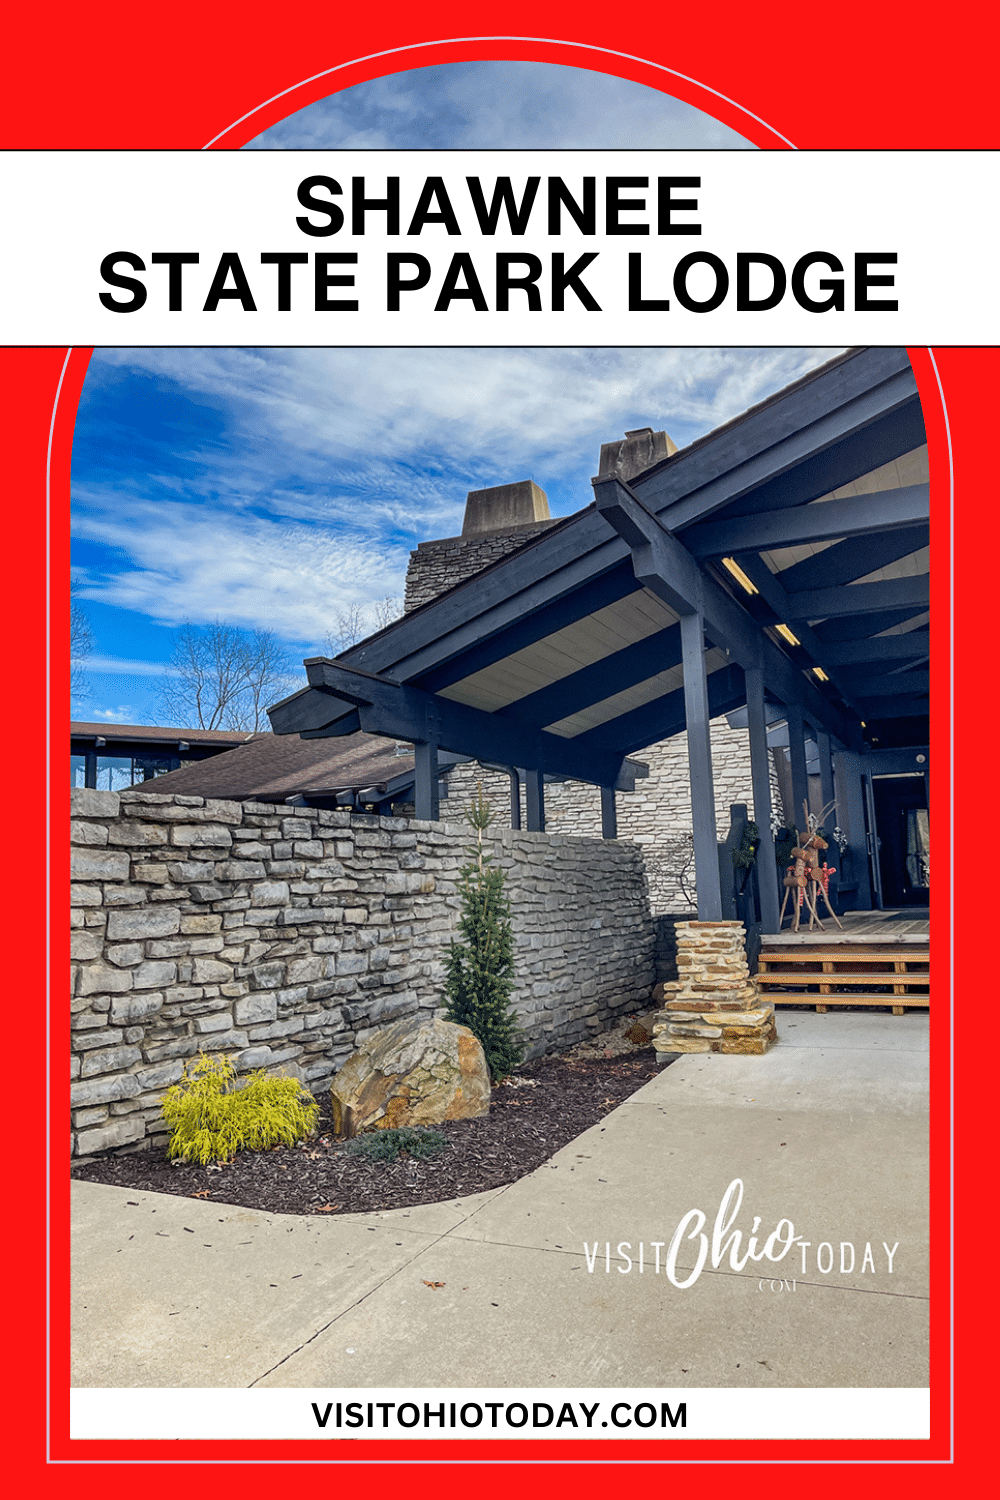 Shawnee State Park Lodge is located in Shawnee State Park. The lodge is an excellent choice for couples or families, offering many room accommodations, activities, and two restaurants on-site.